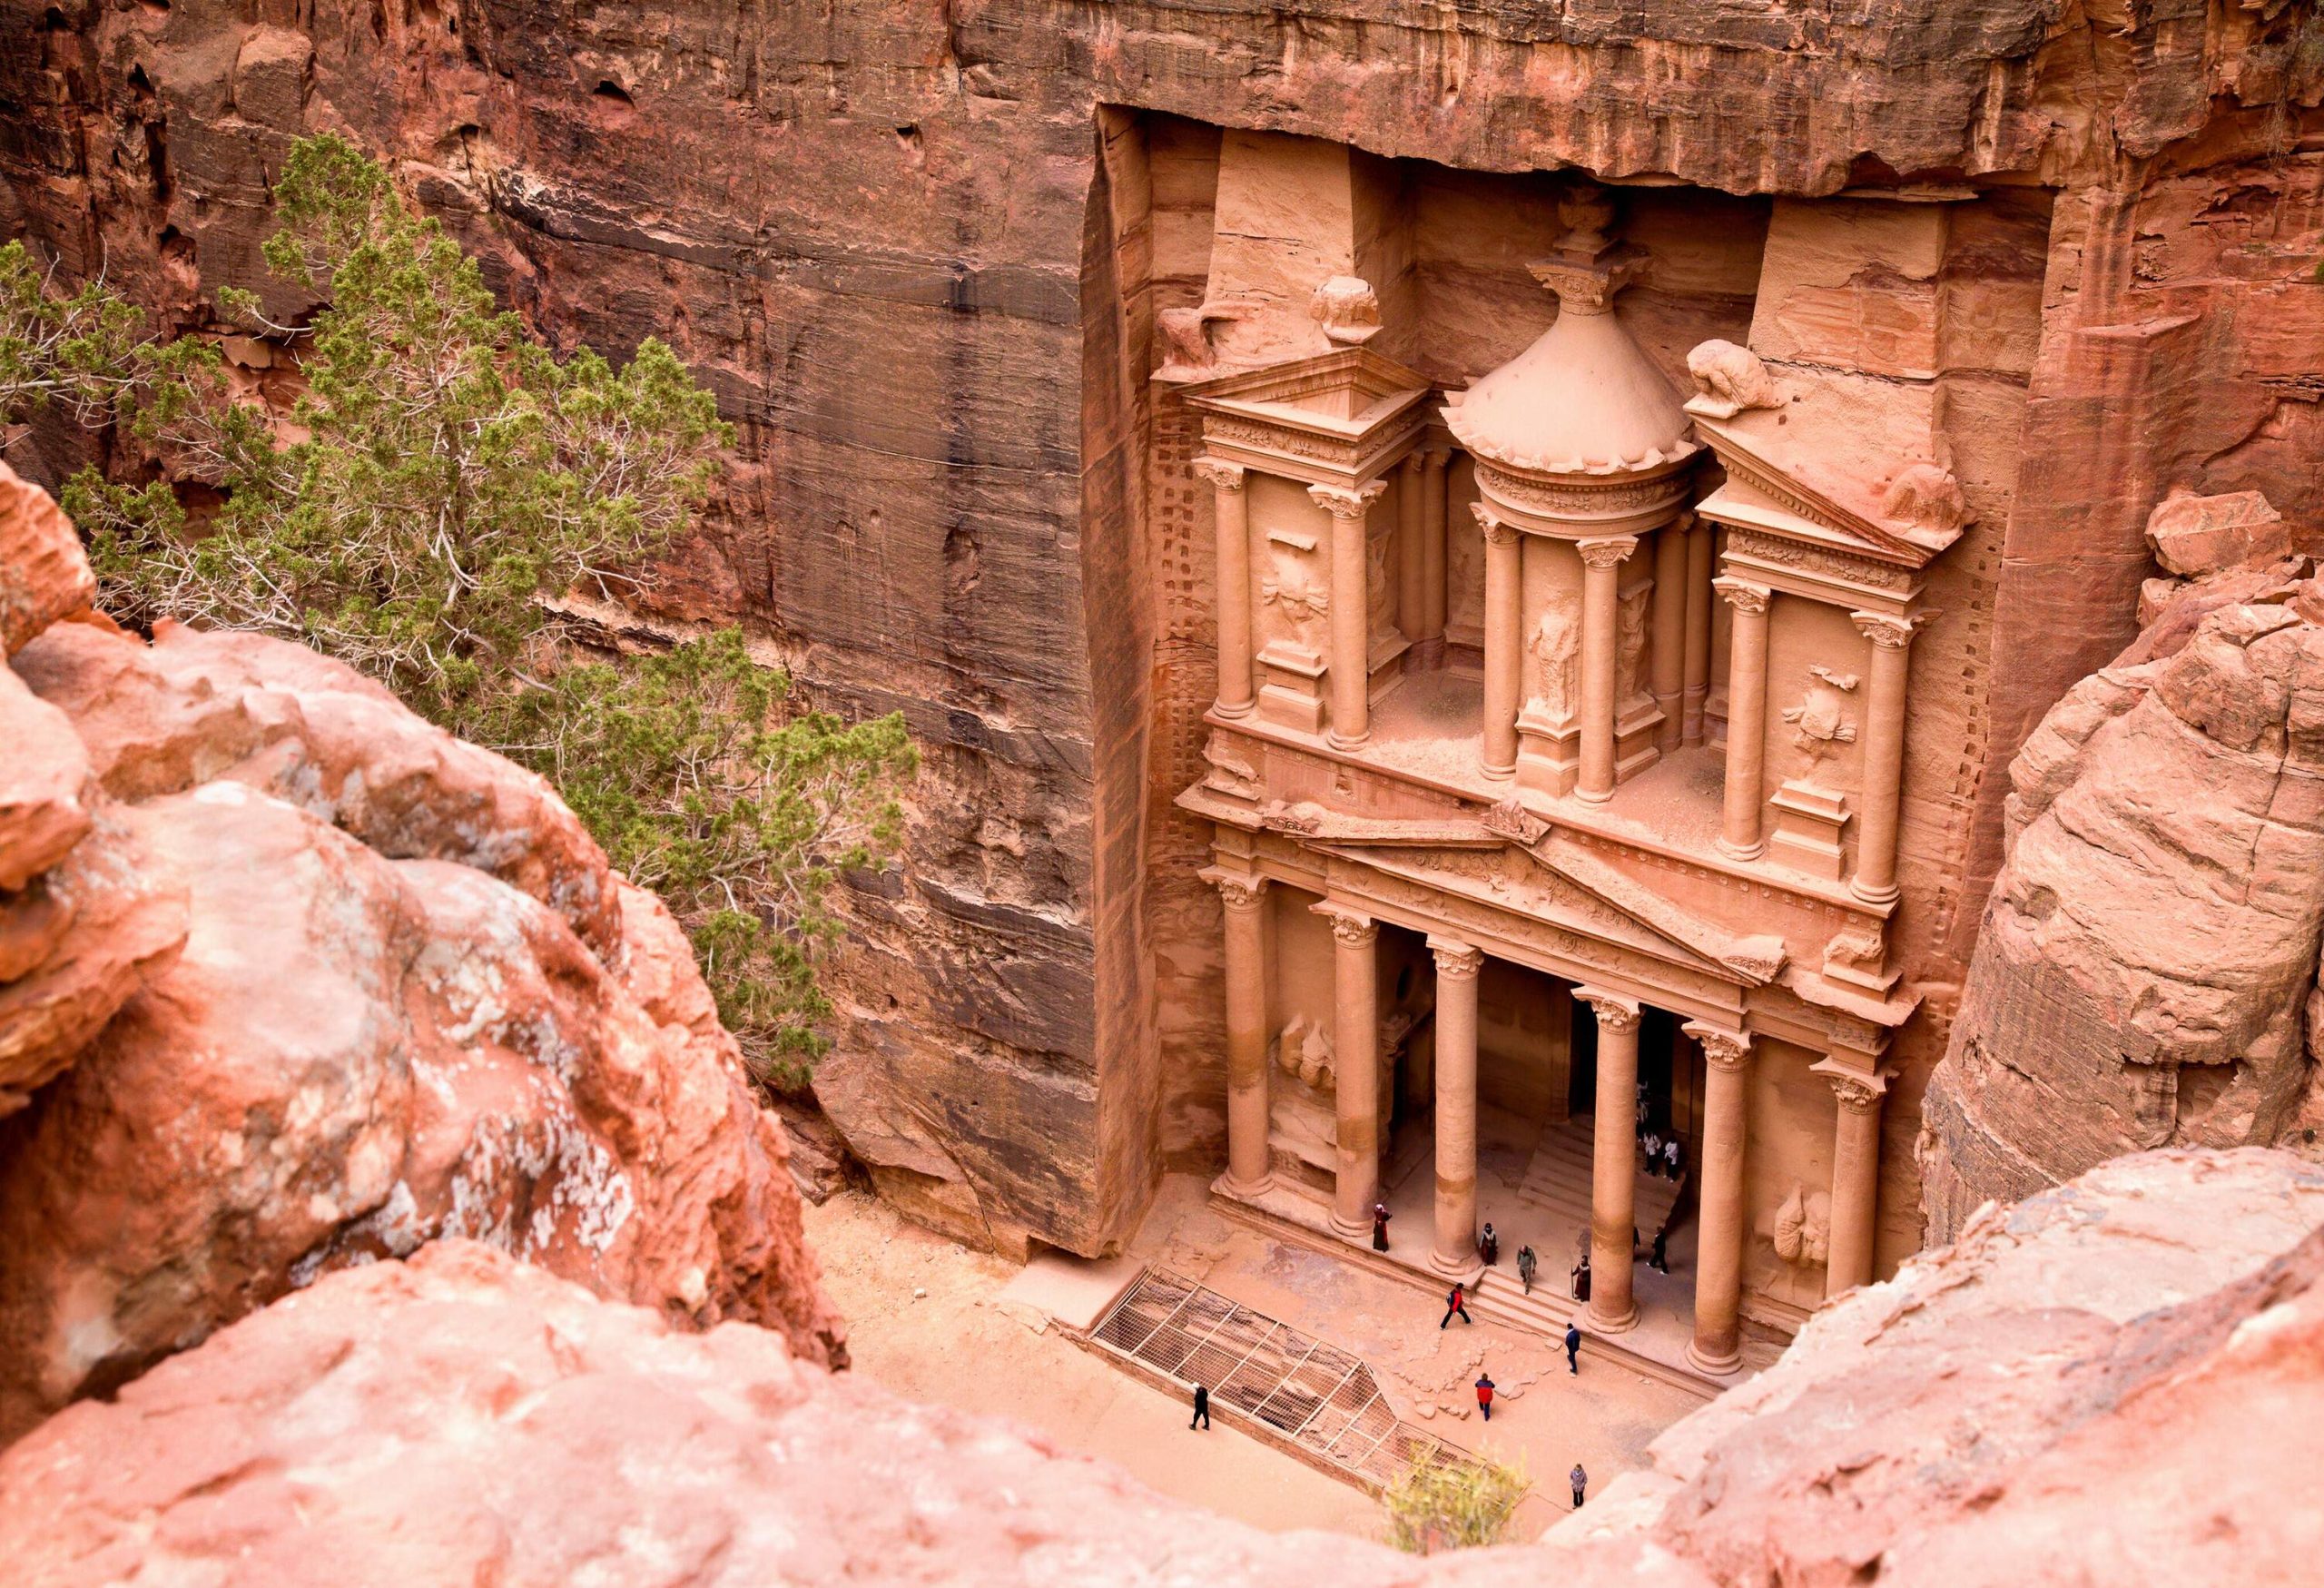 The magnificent ancient city of Petra, sculpted into the rock, welcomes a constant flow of visitors who come and go.